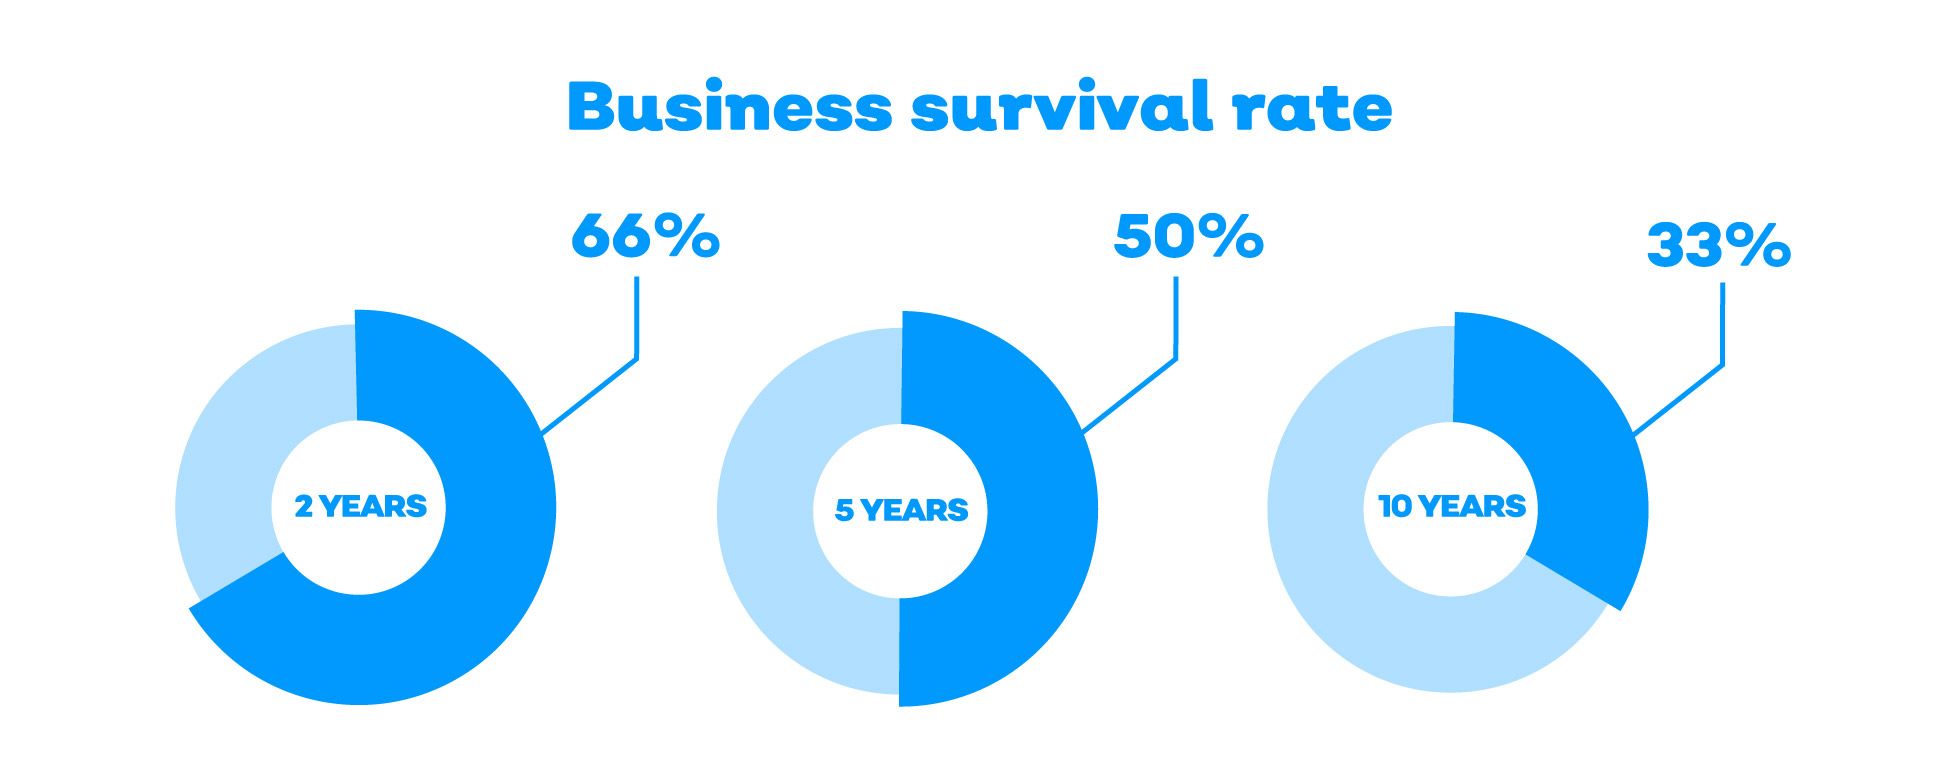 About two-thirds of companies survive two years in business, half of all companies will survive five years, and one-third will survive 10.